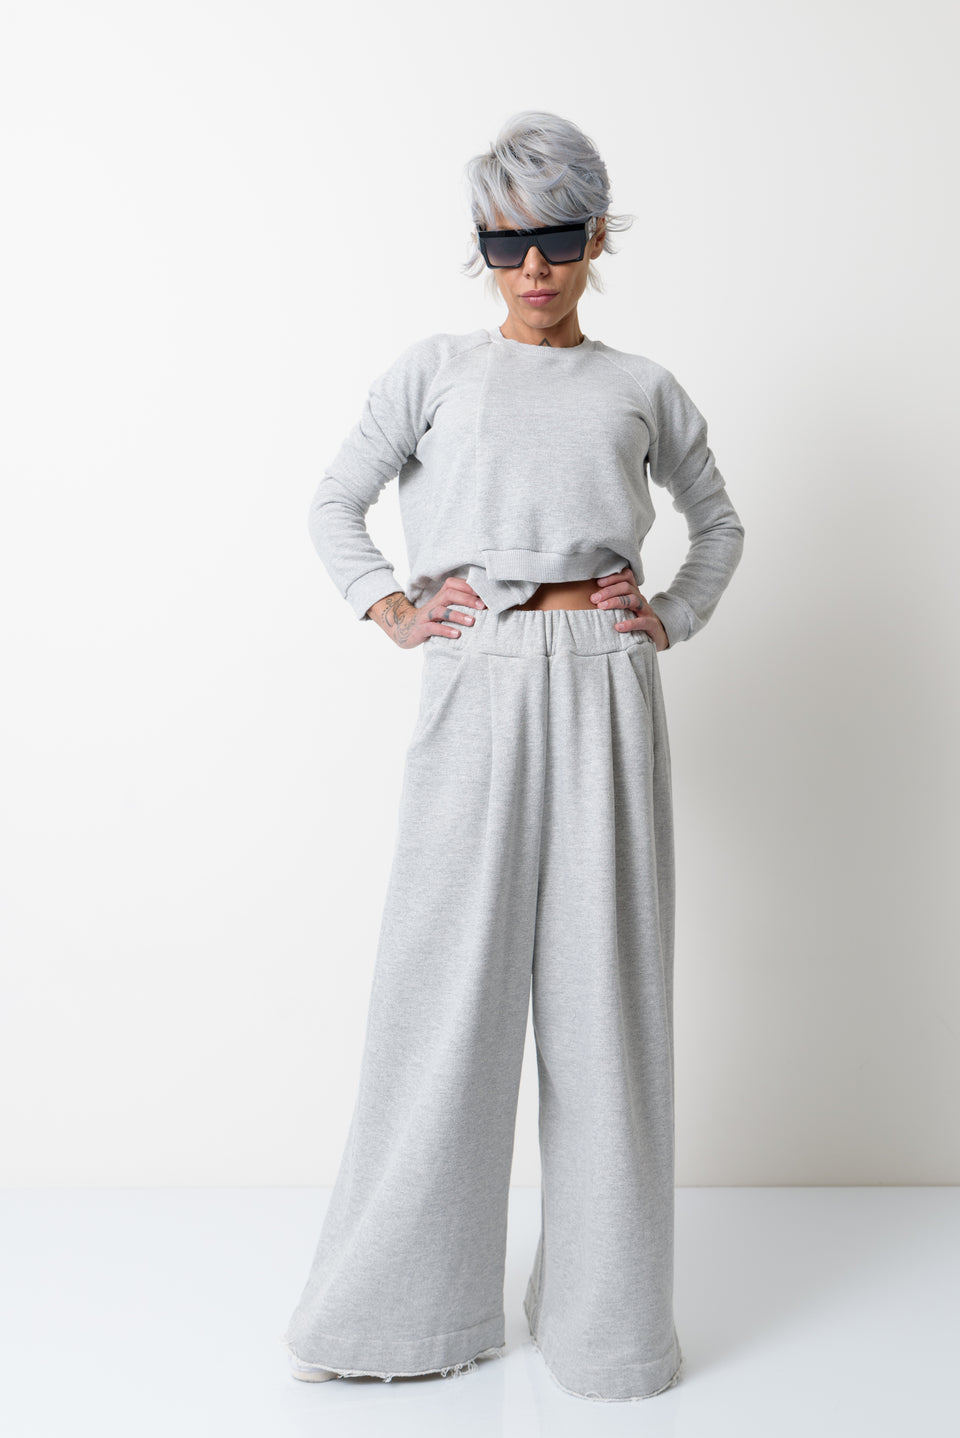 GREY TWO PIECE TRACKSUIT SET FOR WOMEN